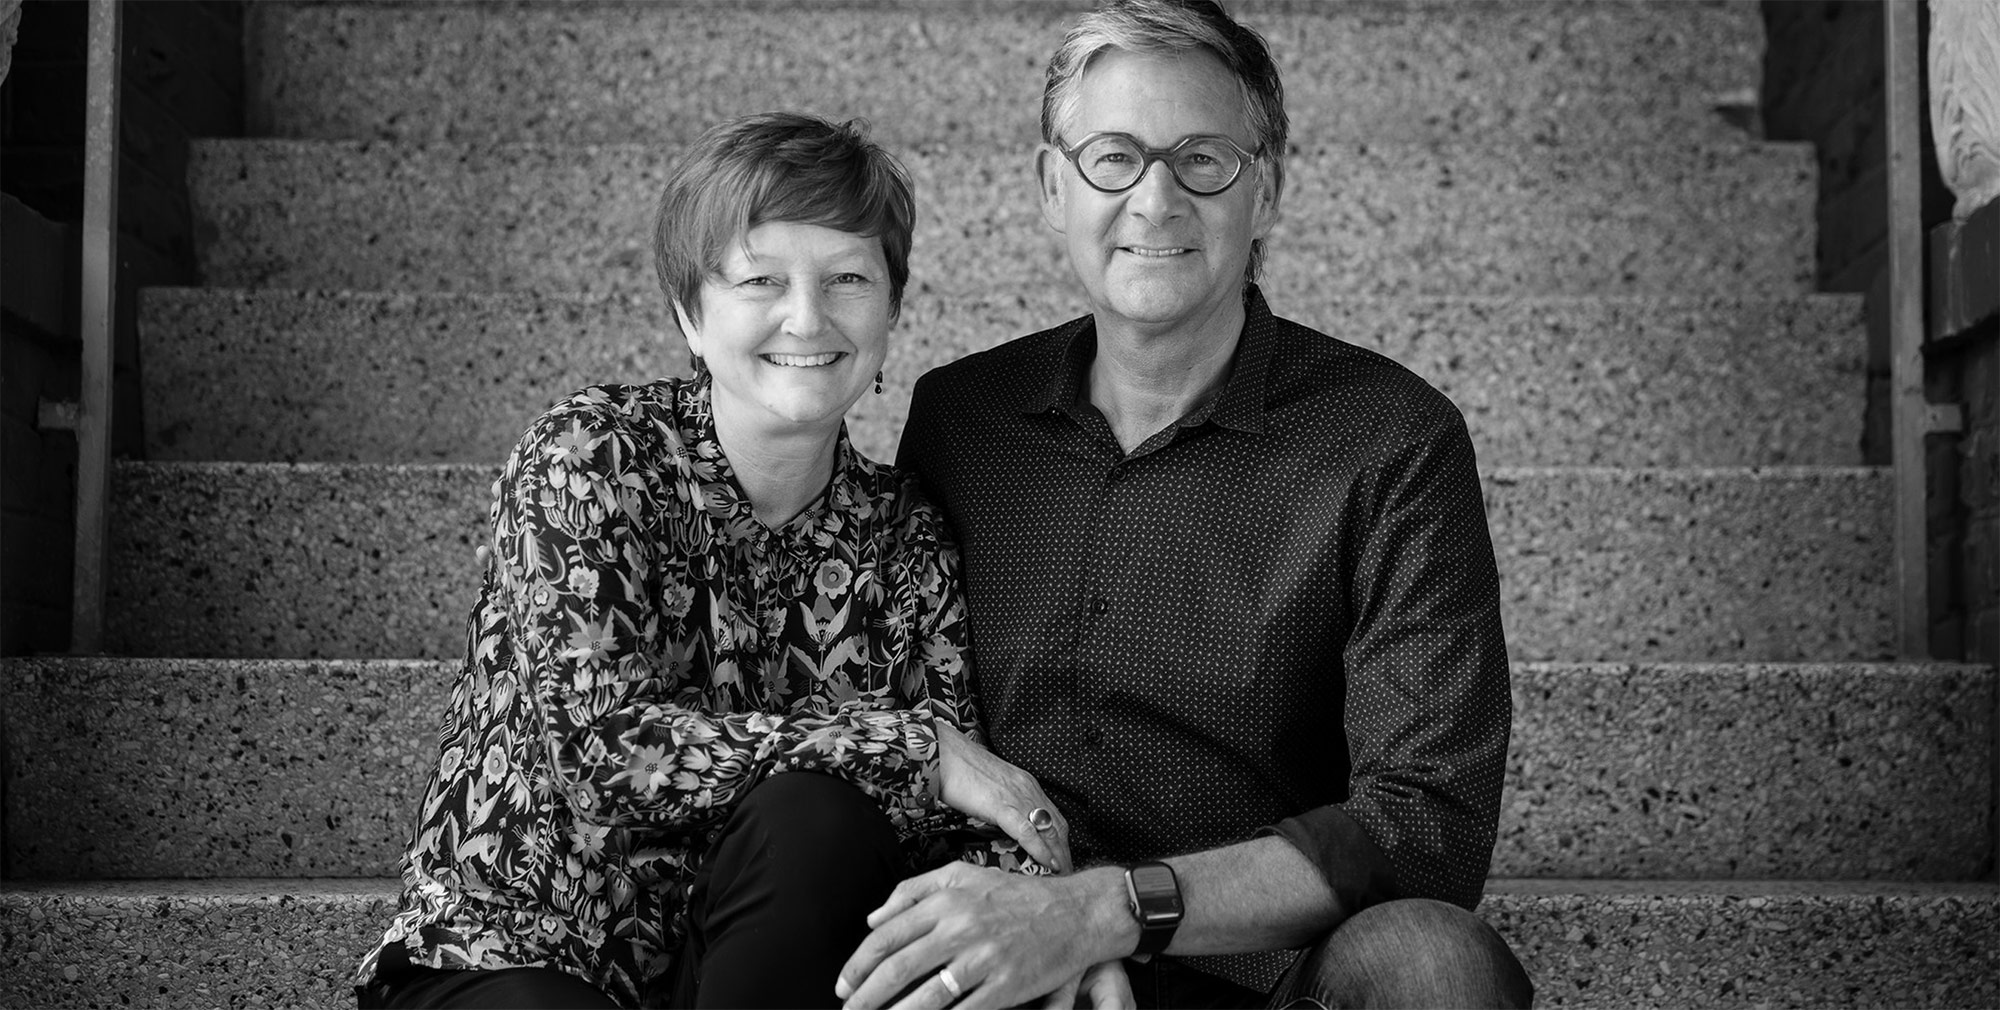 A portrait of Tina and her partner Paul sitting on steps together in black and white